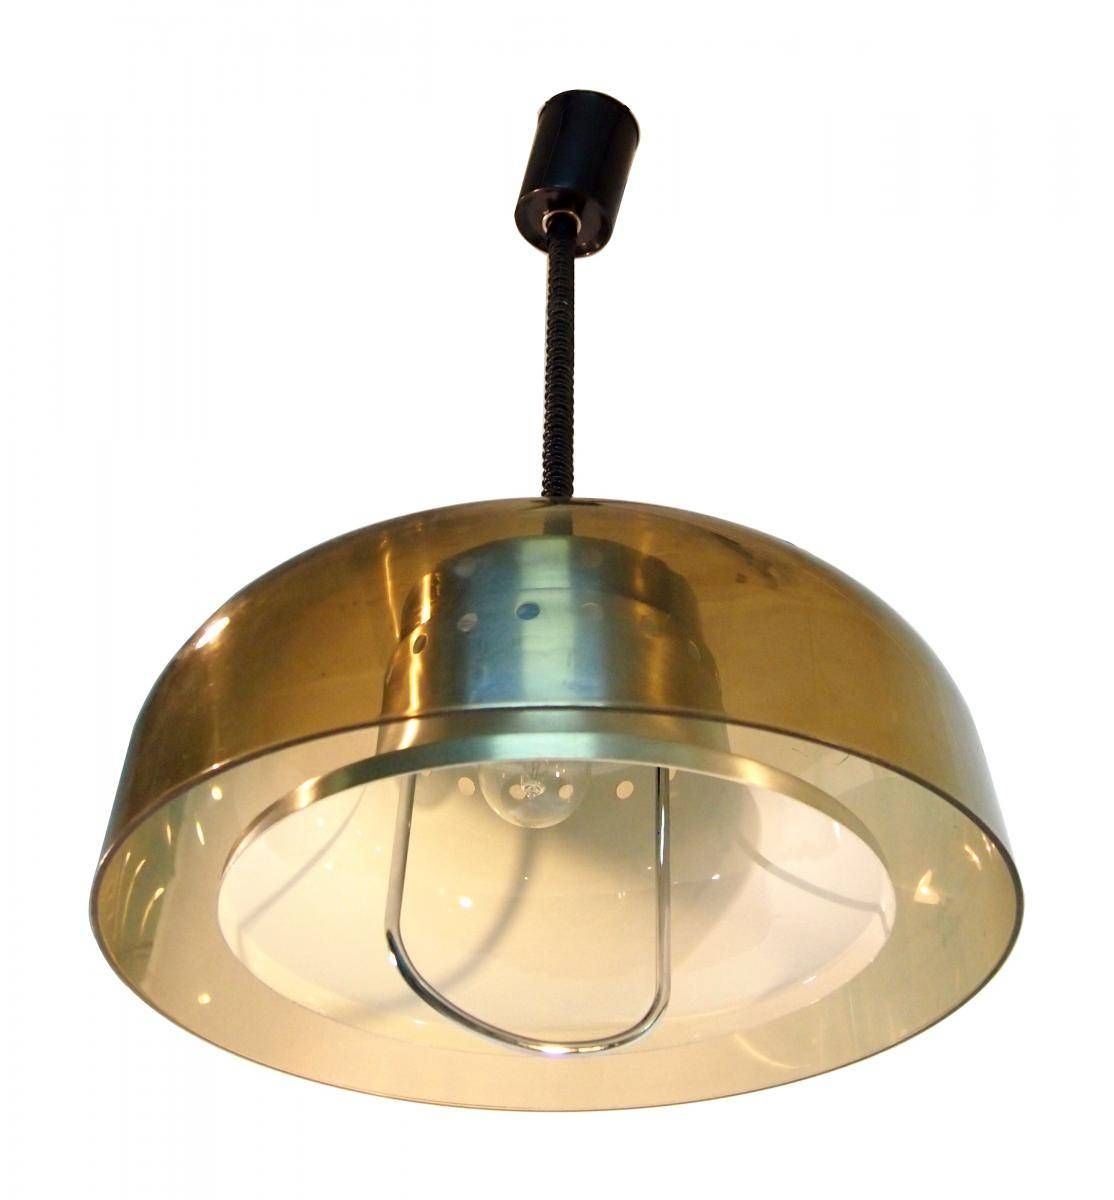 Pull Down Space Age Pendant Hanging Lightharvey Guzzini, 1967 Pertaining To Pull Down Pendant Lighting (View 9 of 15)